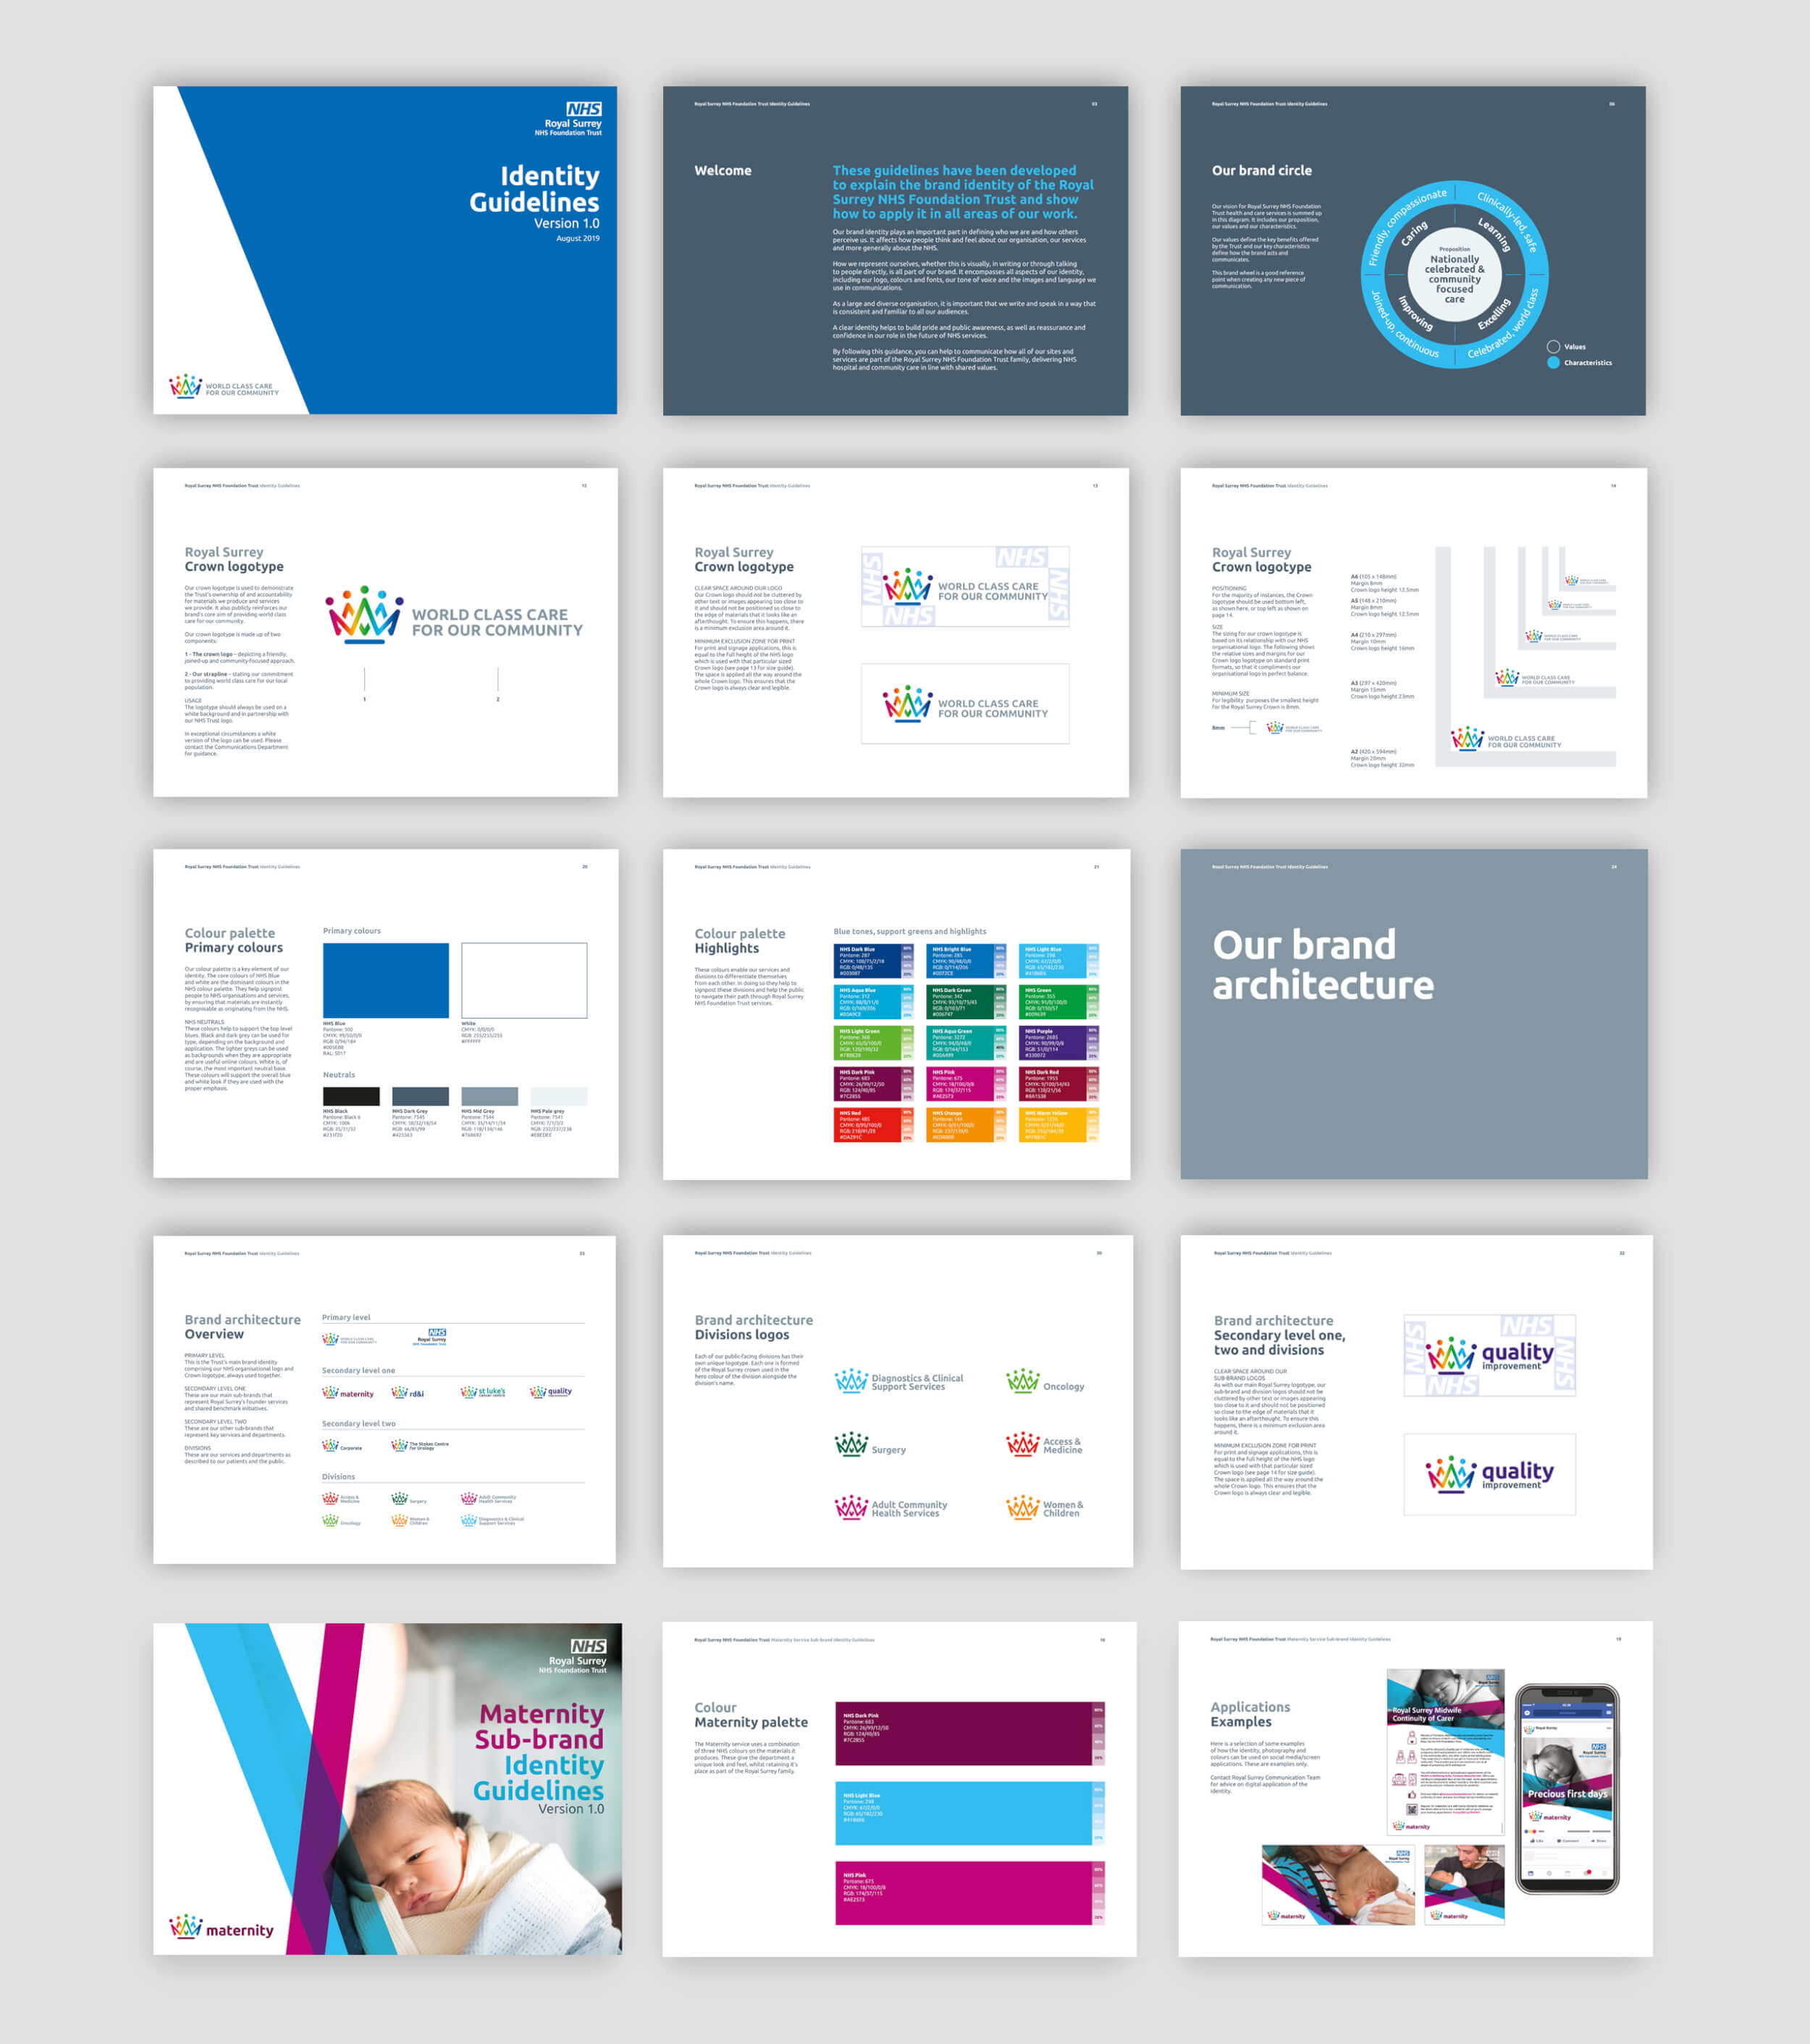 Royal Surrey brand guidelines example pages